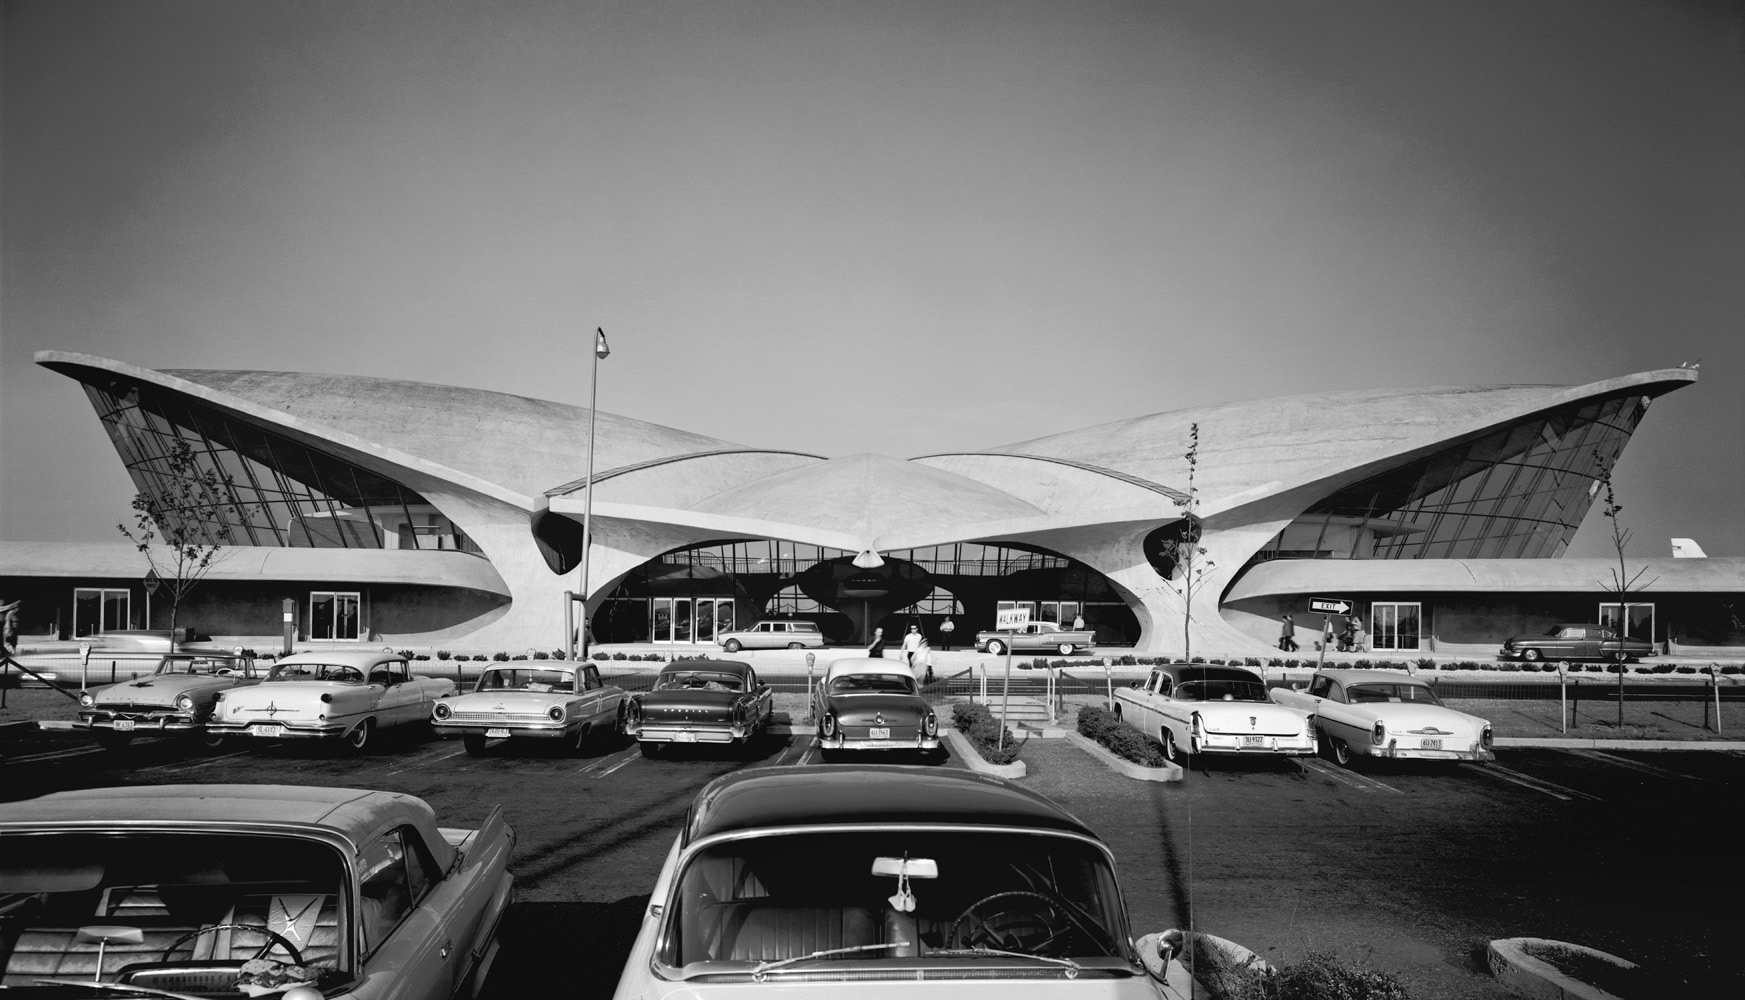 Ezra Stoller TWA Terminal at Idlewild Airport, Eero Saarinen, New York, NY 1962. All images photographed by Ezra Stoller and courtesy of Yossi Milo Gallery.